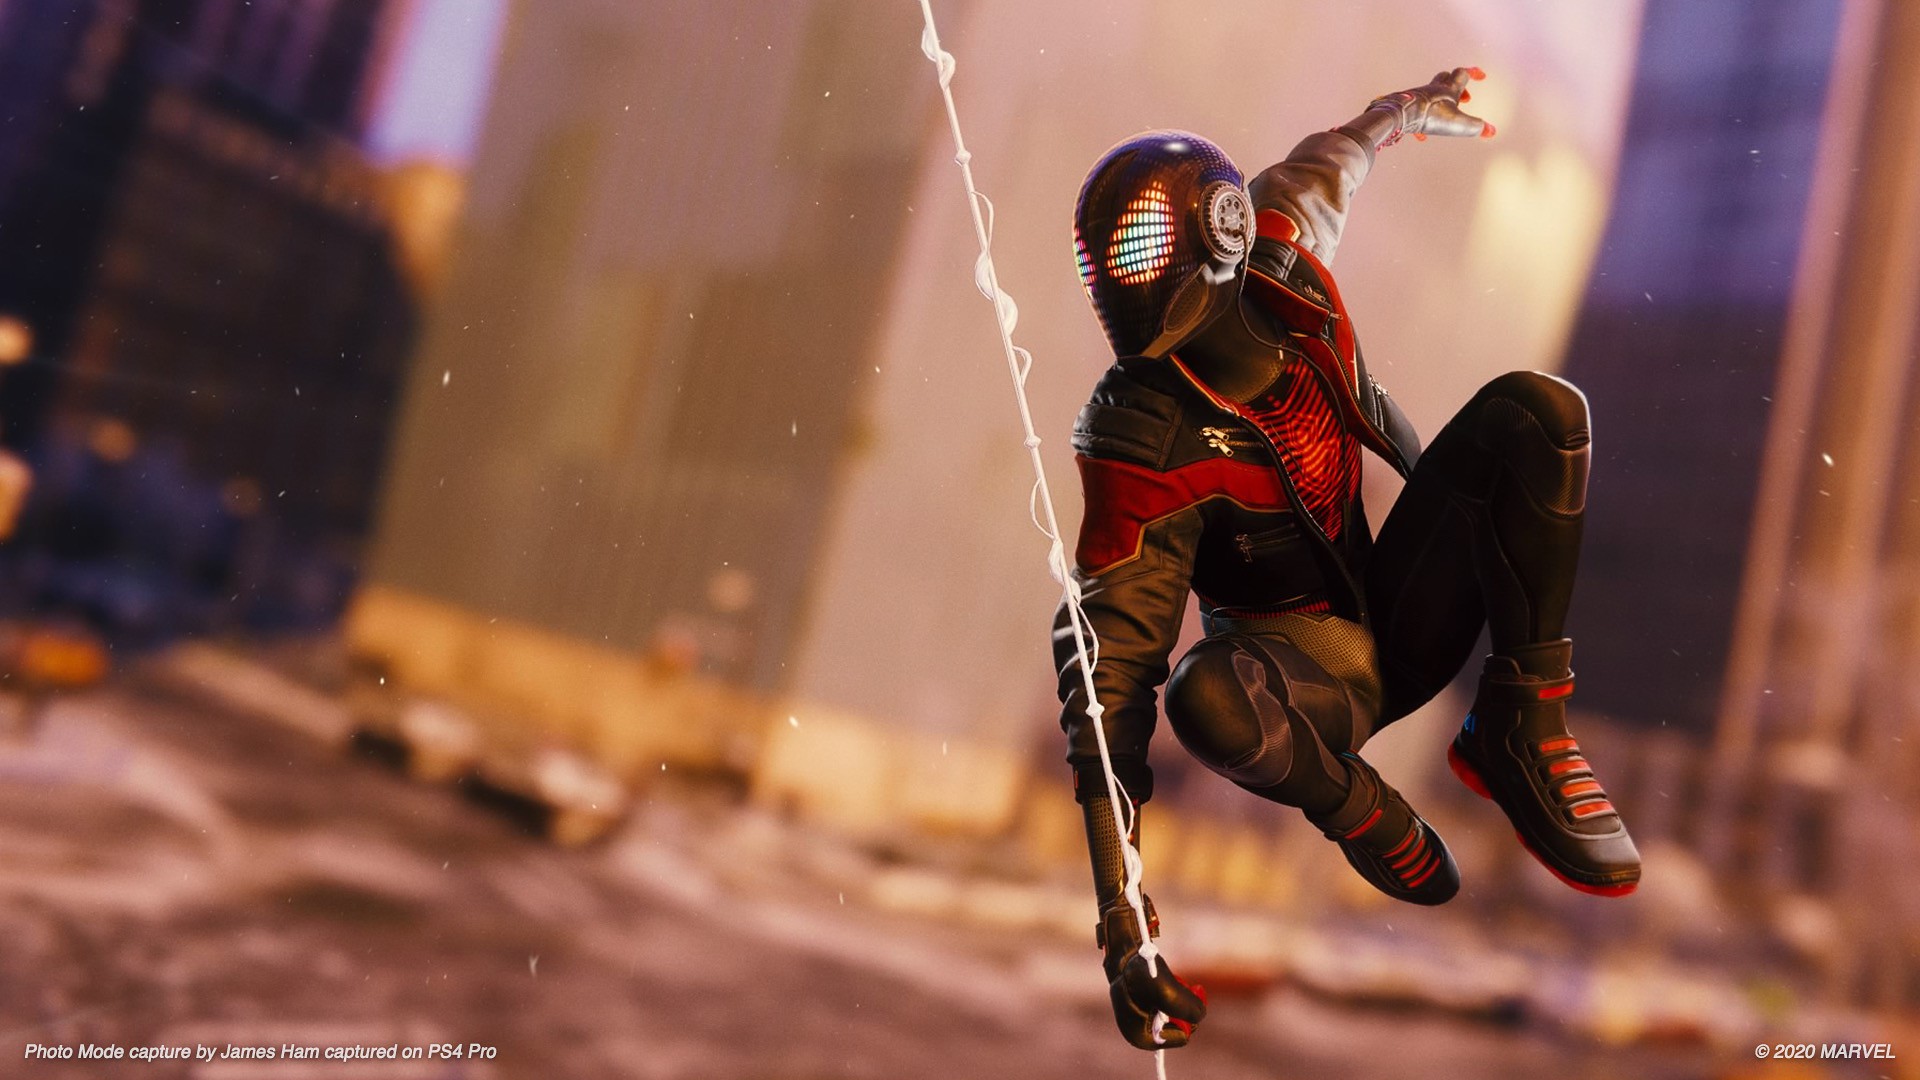 Best shots from Spider-Man: Miles Morales' photo mode on the PS4